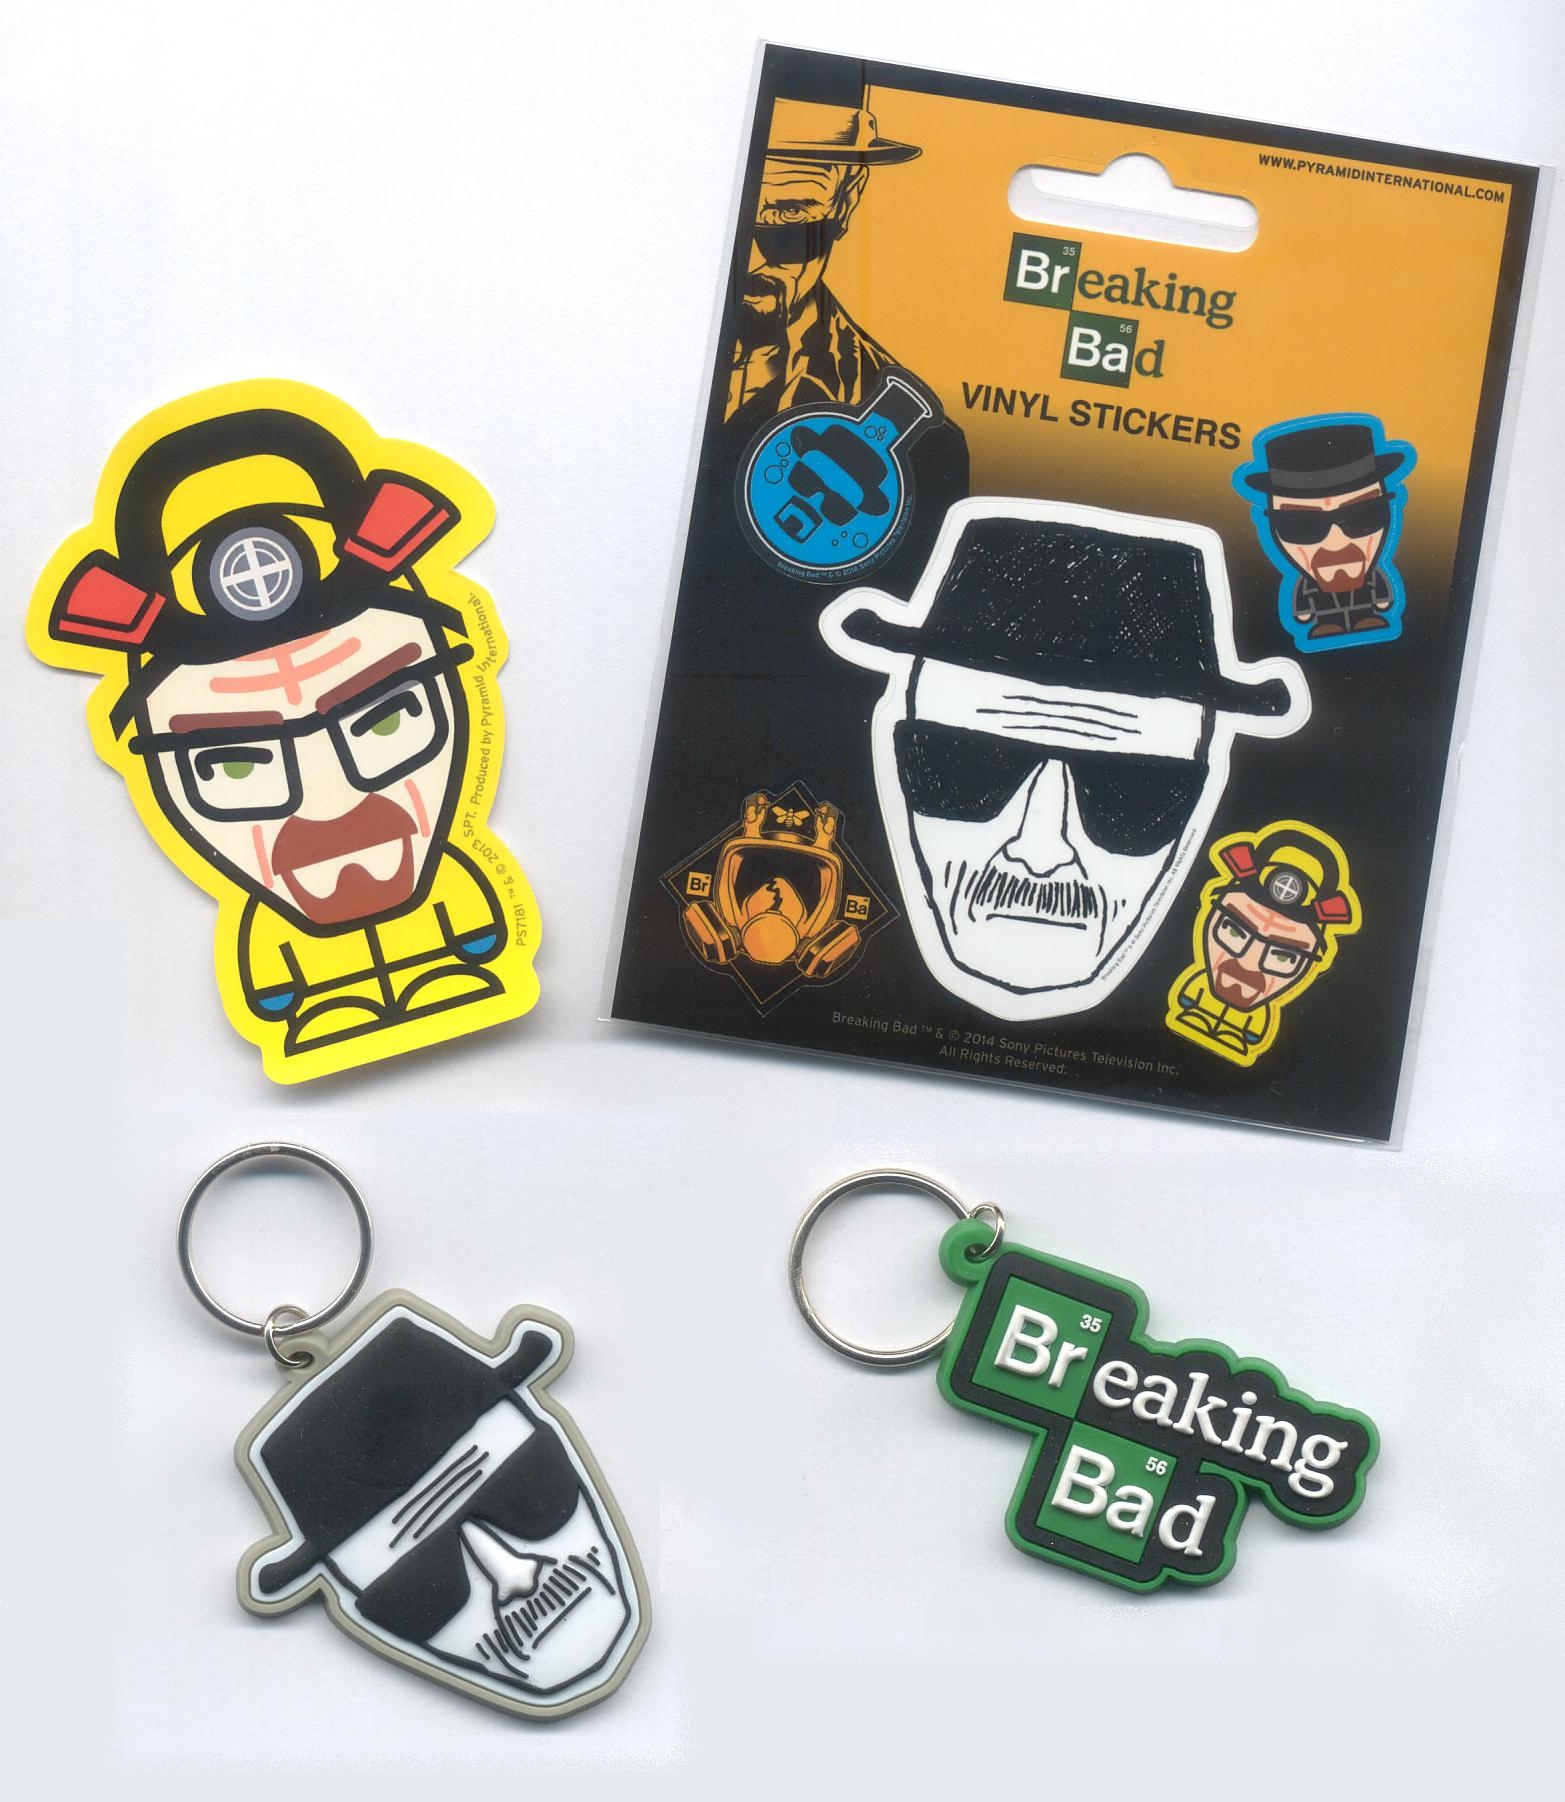 'Breaking Bad' stickers and keychains